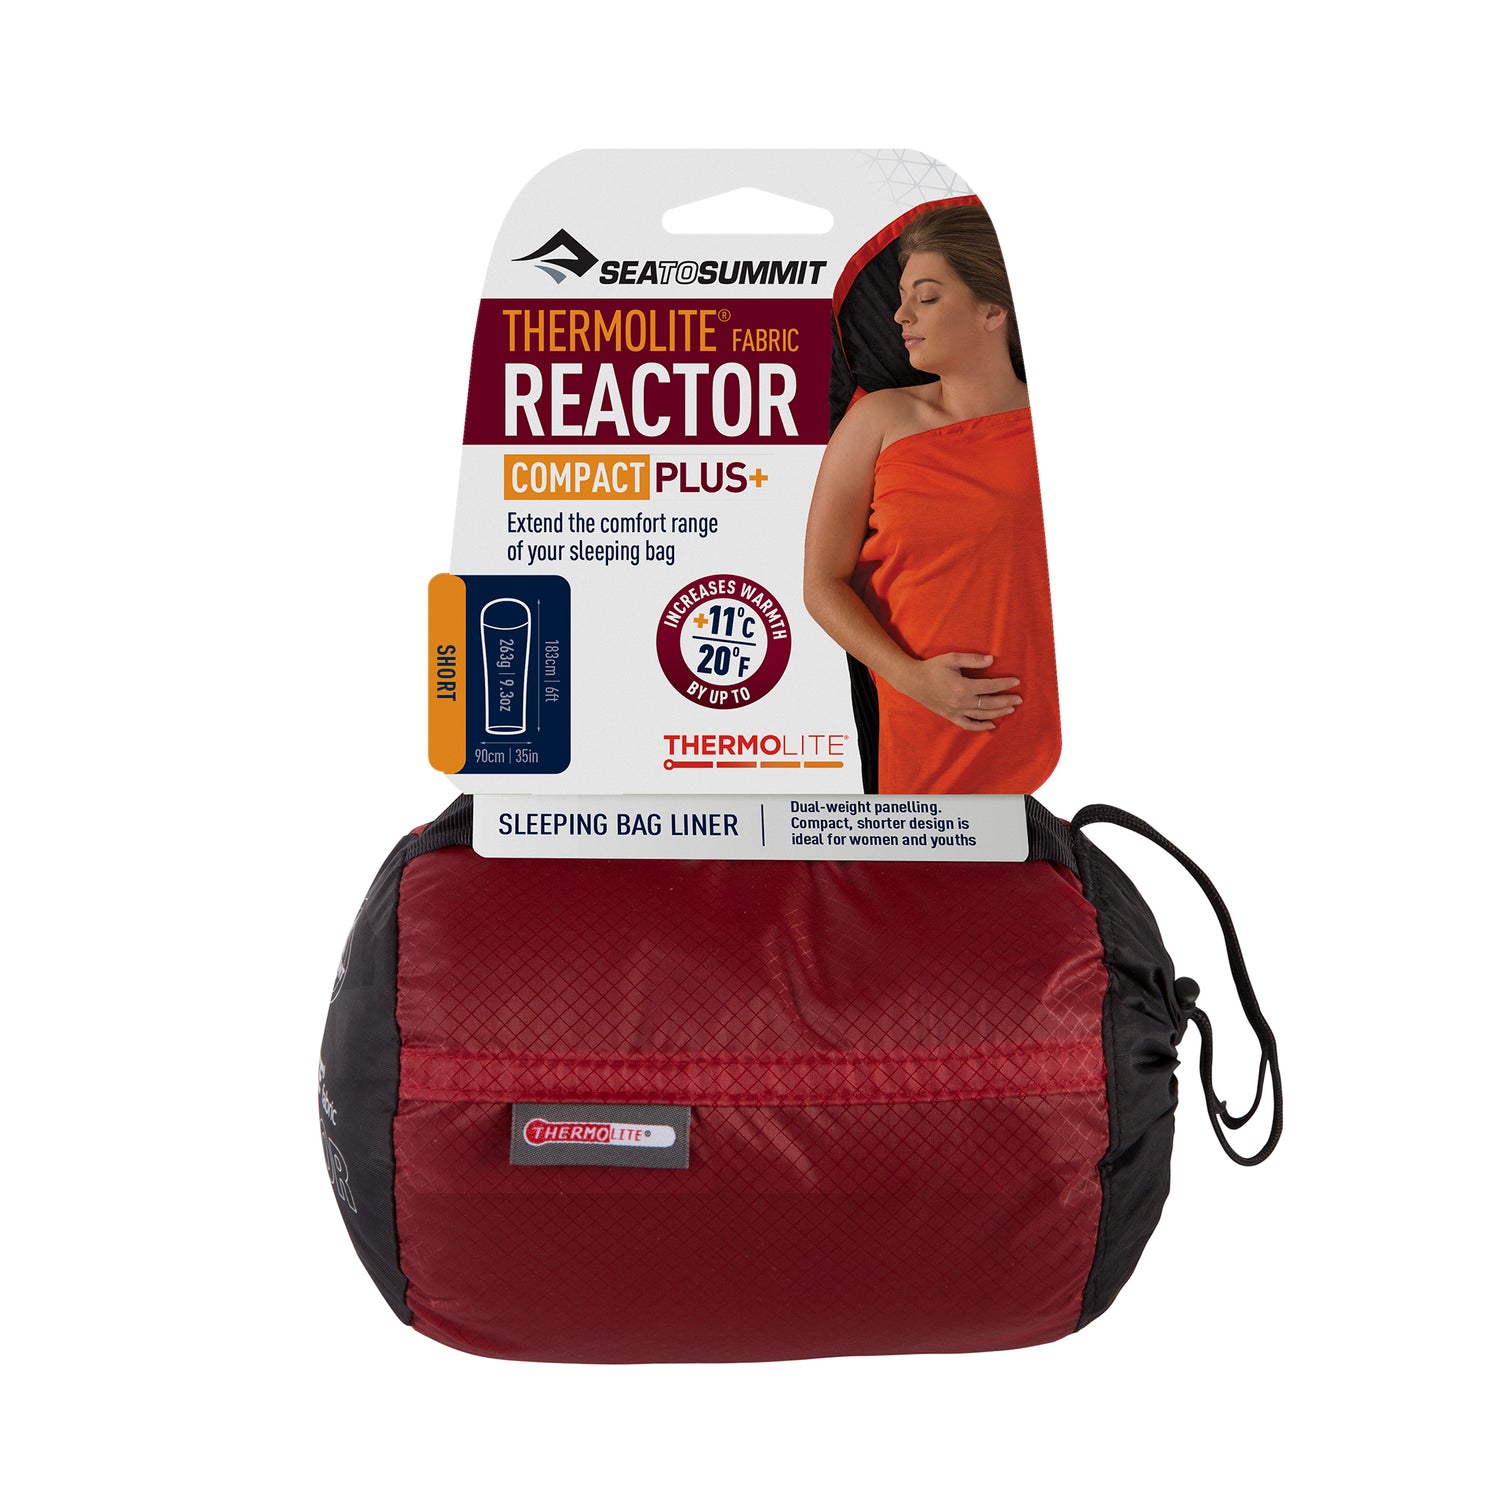 Reactor Compact Plus Liner (adds up to 20°F)